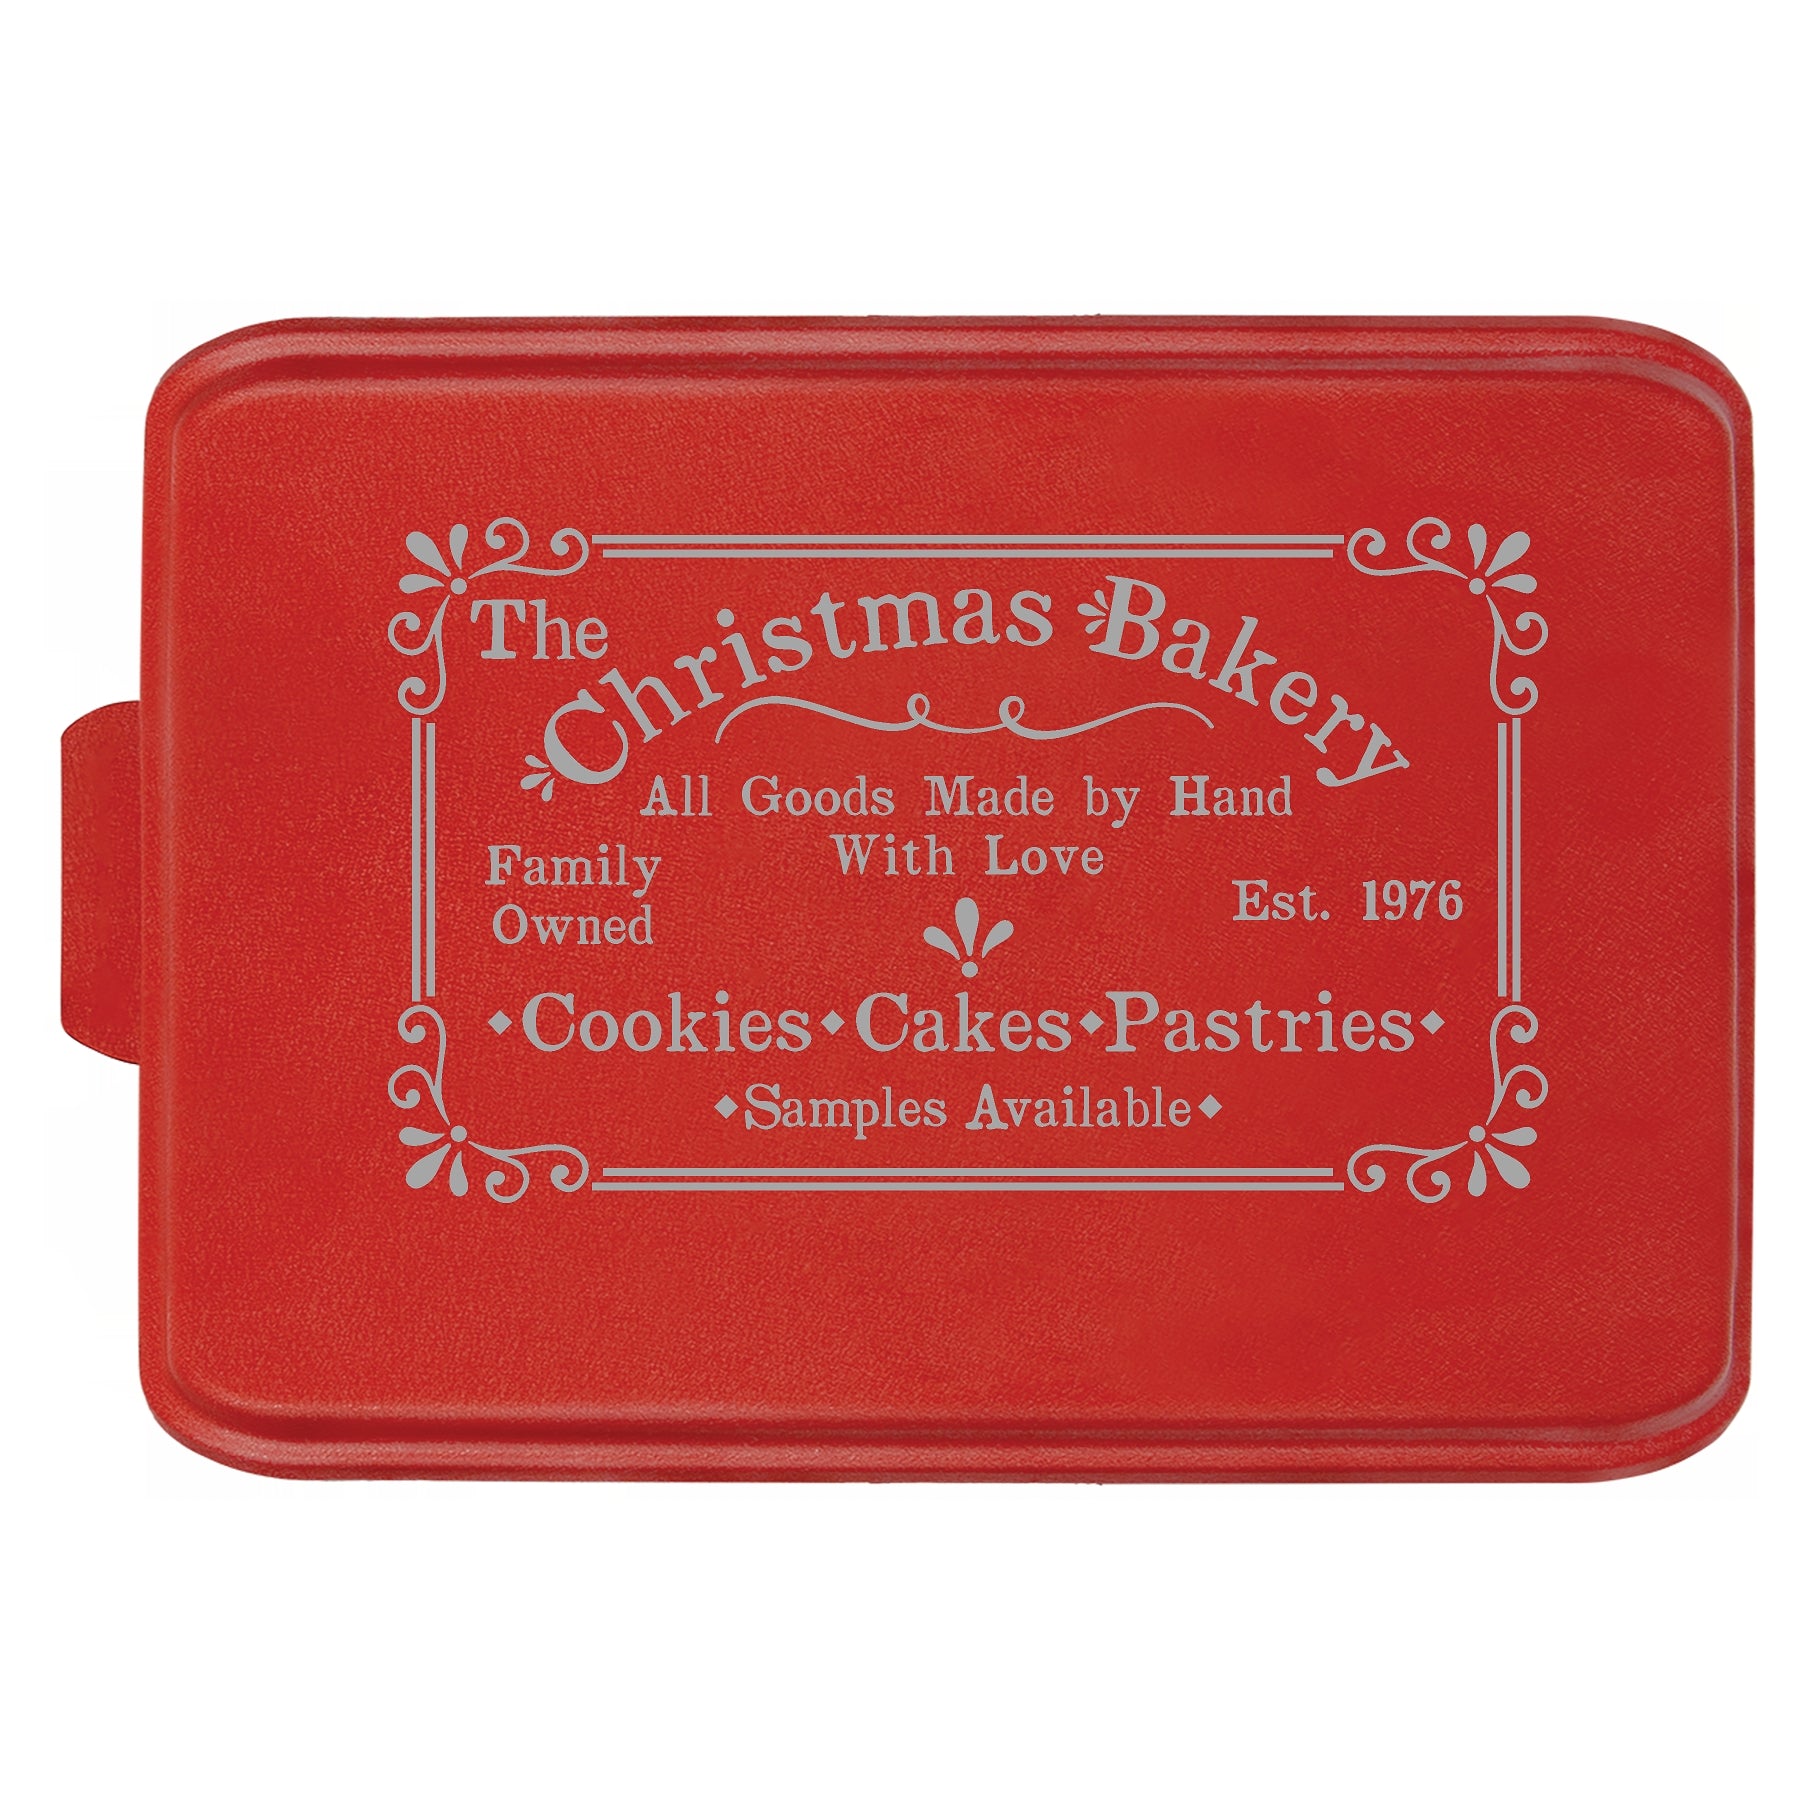 9 x 13 Aluminum Cake Pan with Red Lid - Merry Christmas - ImpressMeGifts